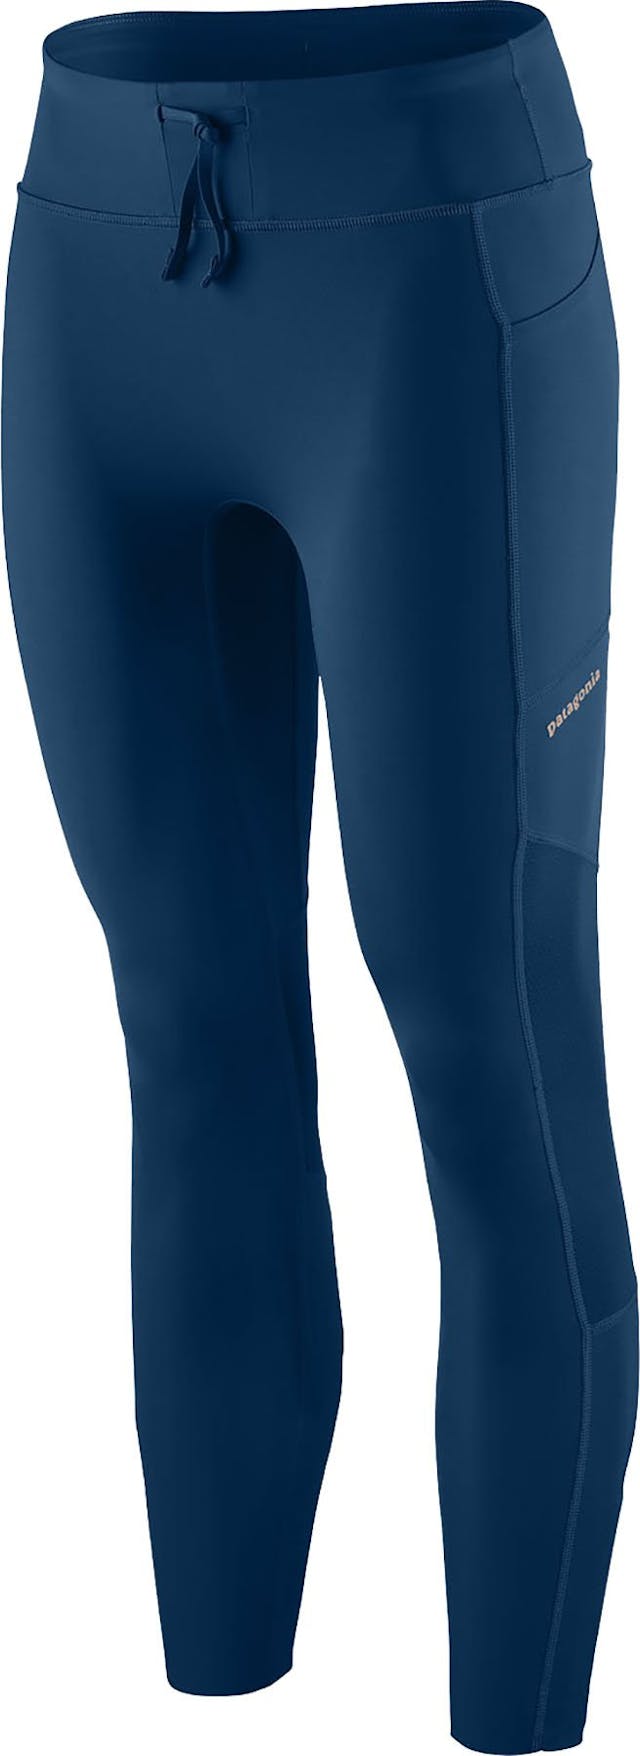 Product image for Endless Run 7/8 Tights - Women's